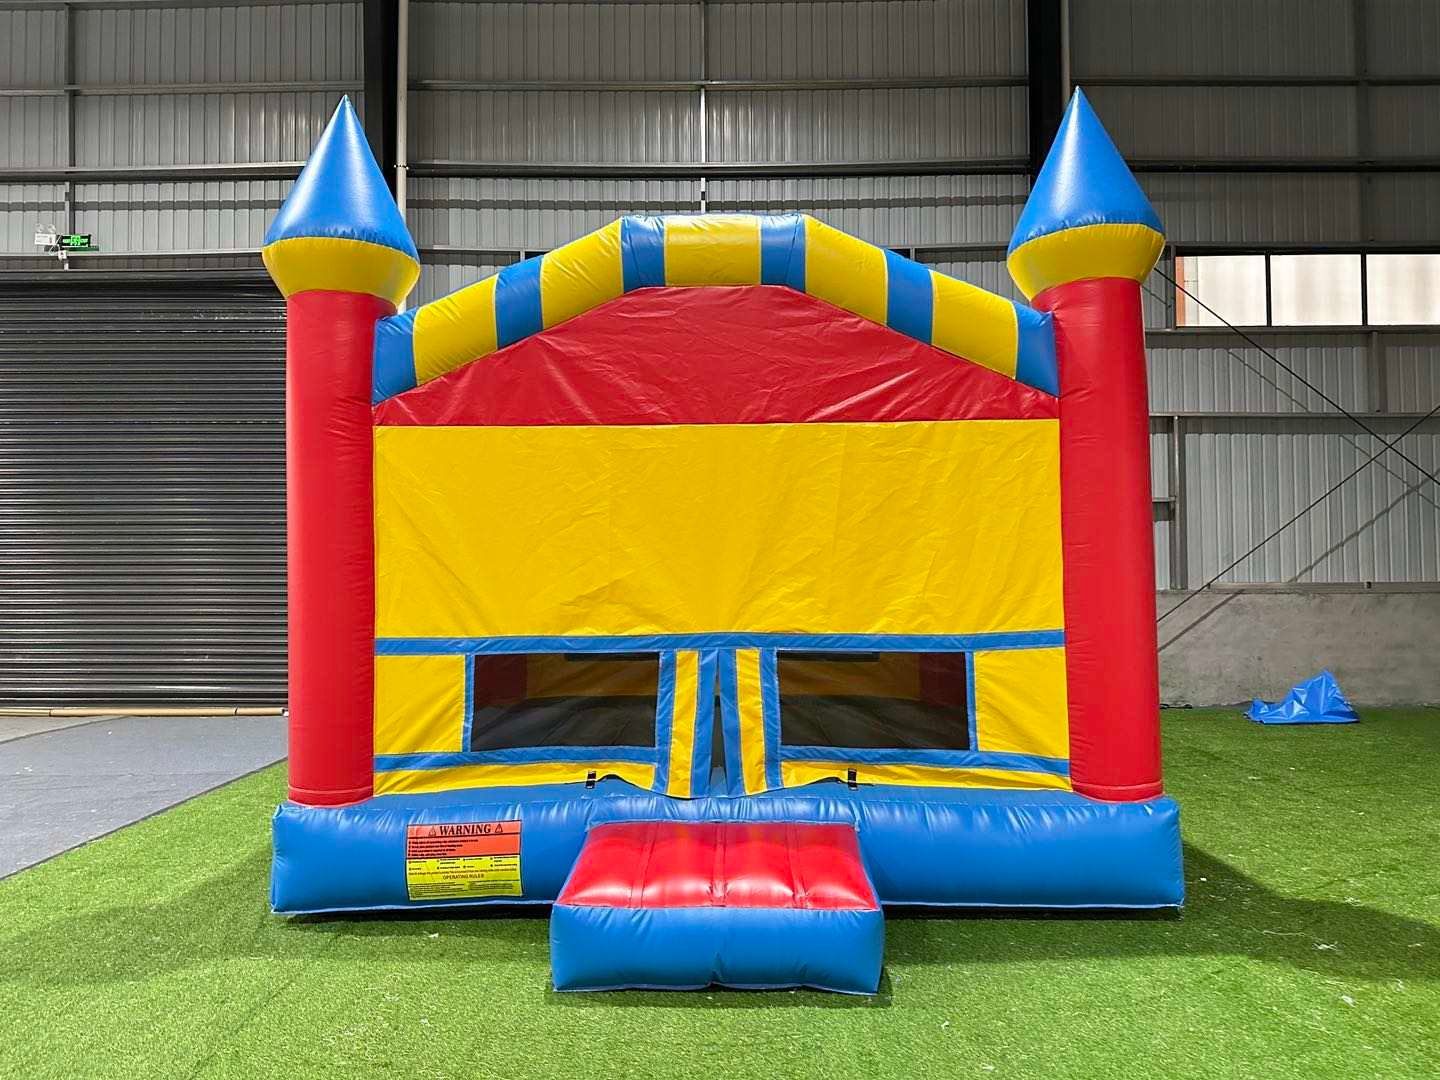 Red, Blue, and Yellow Bouncy Castle | Rancho Cucamonga, CA | Jam Jam Bounce house & inflatable party rentals